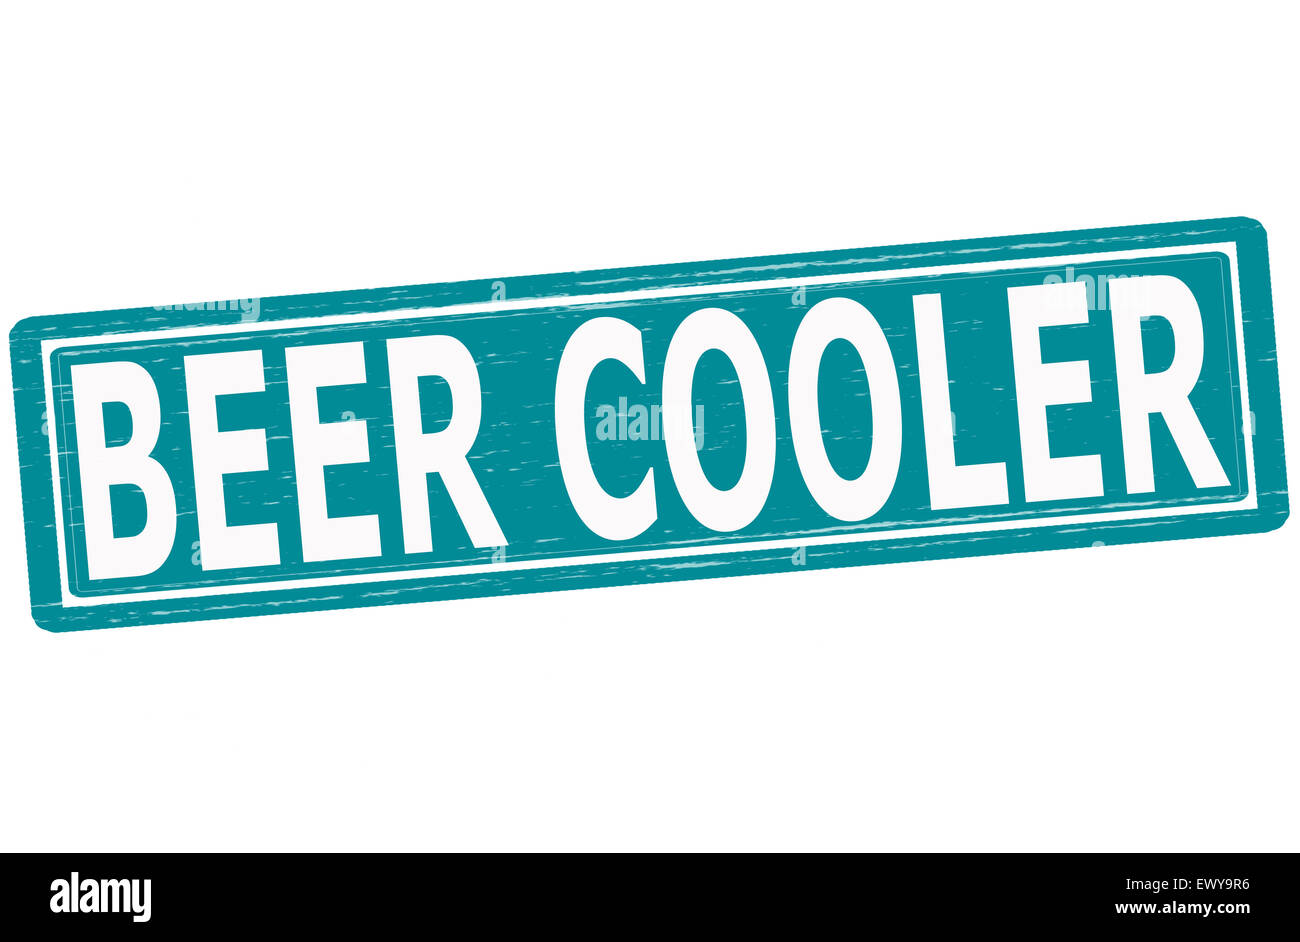 Stamp with text beer cooler inside, illustration Stock Photo